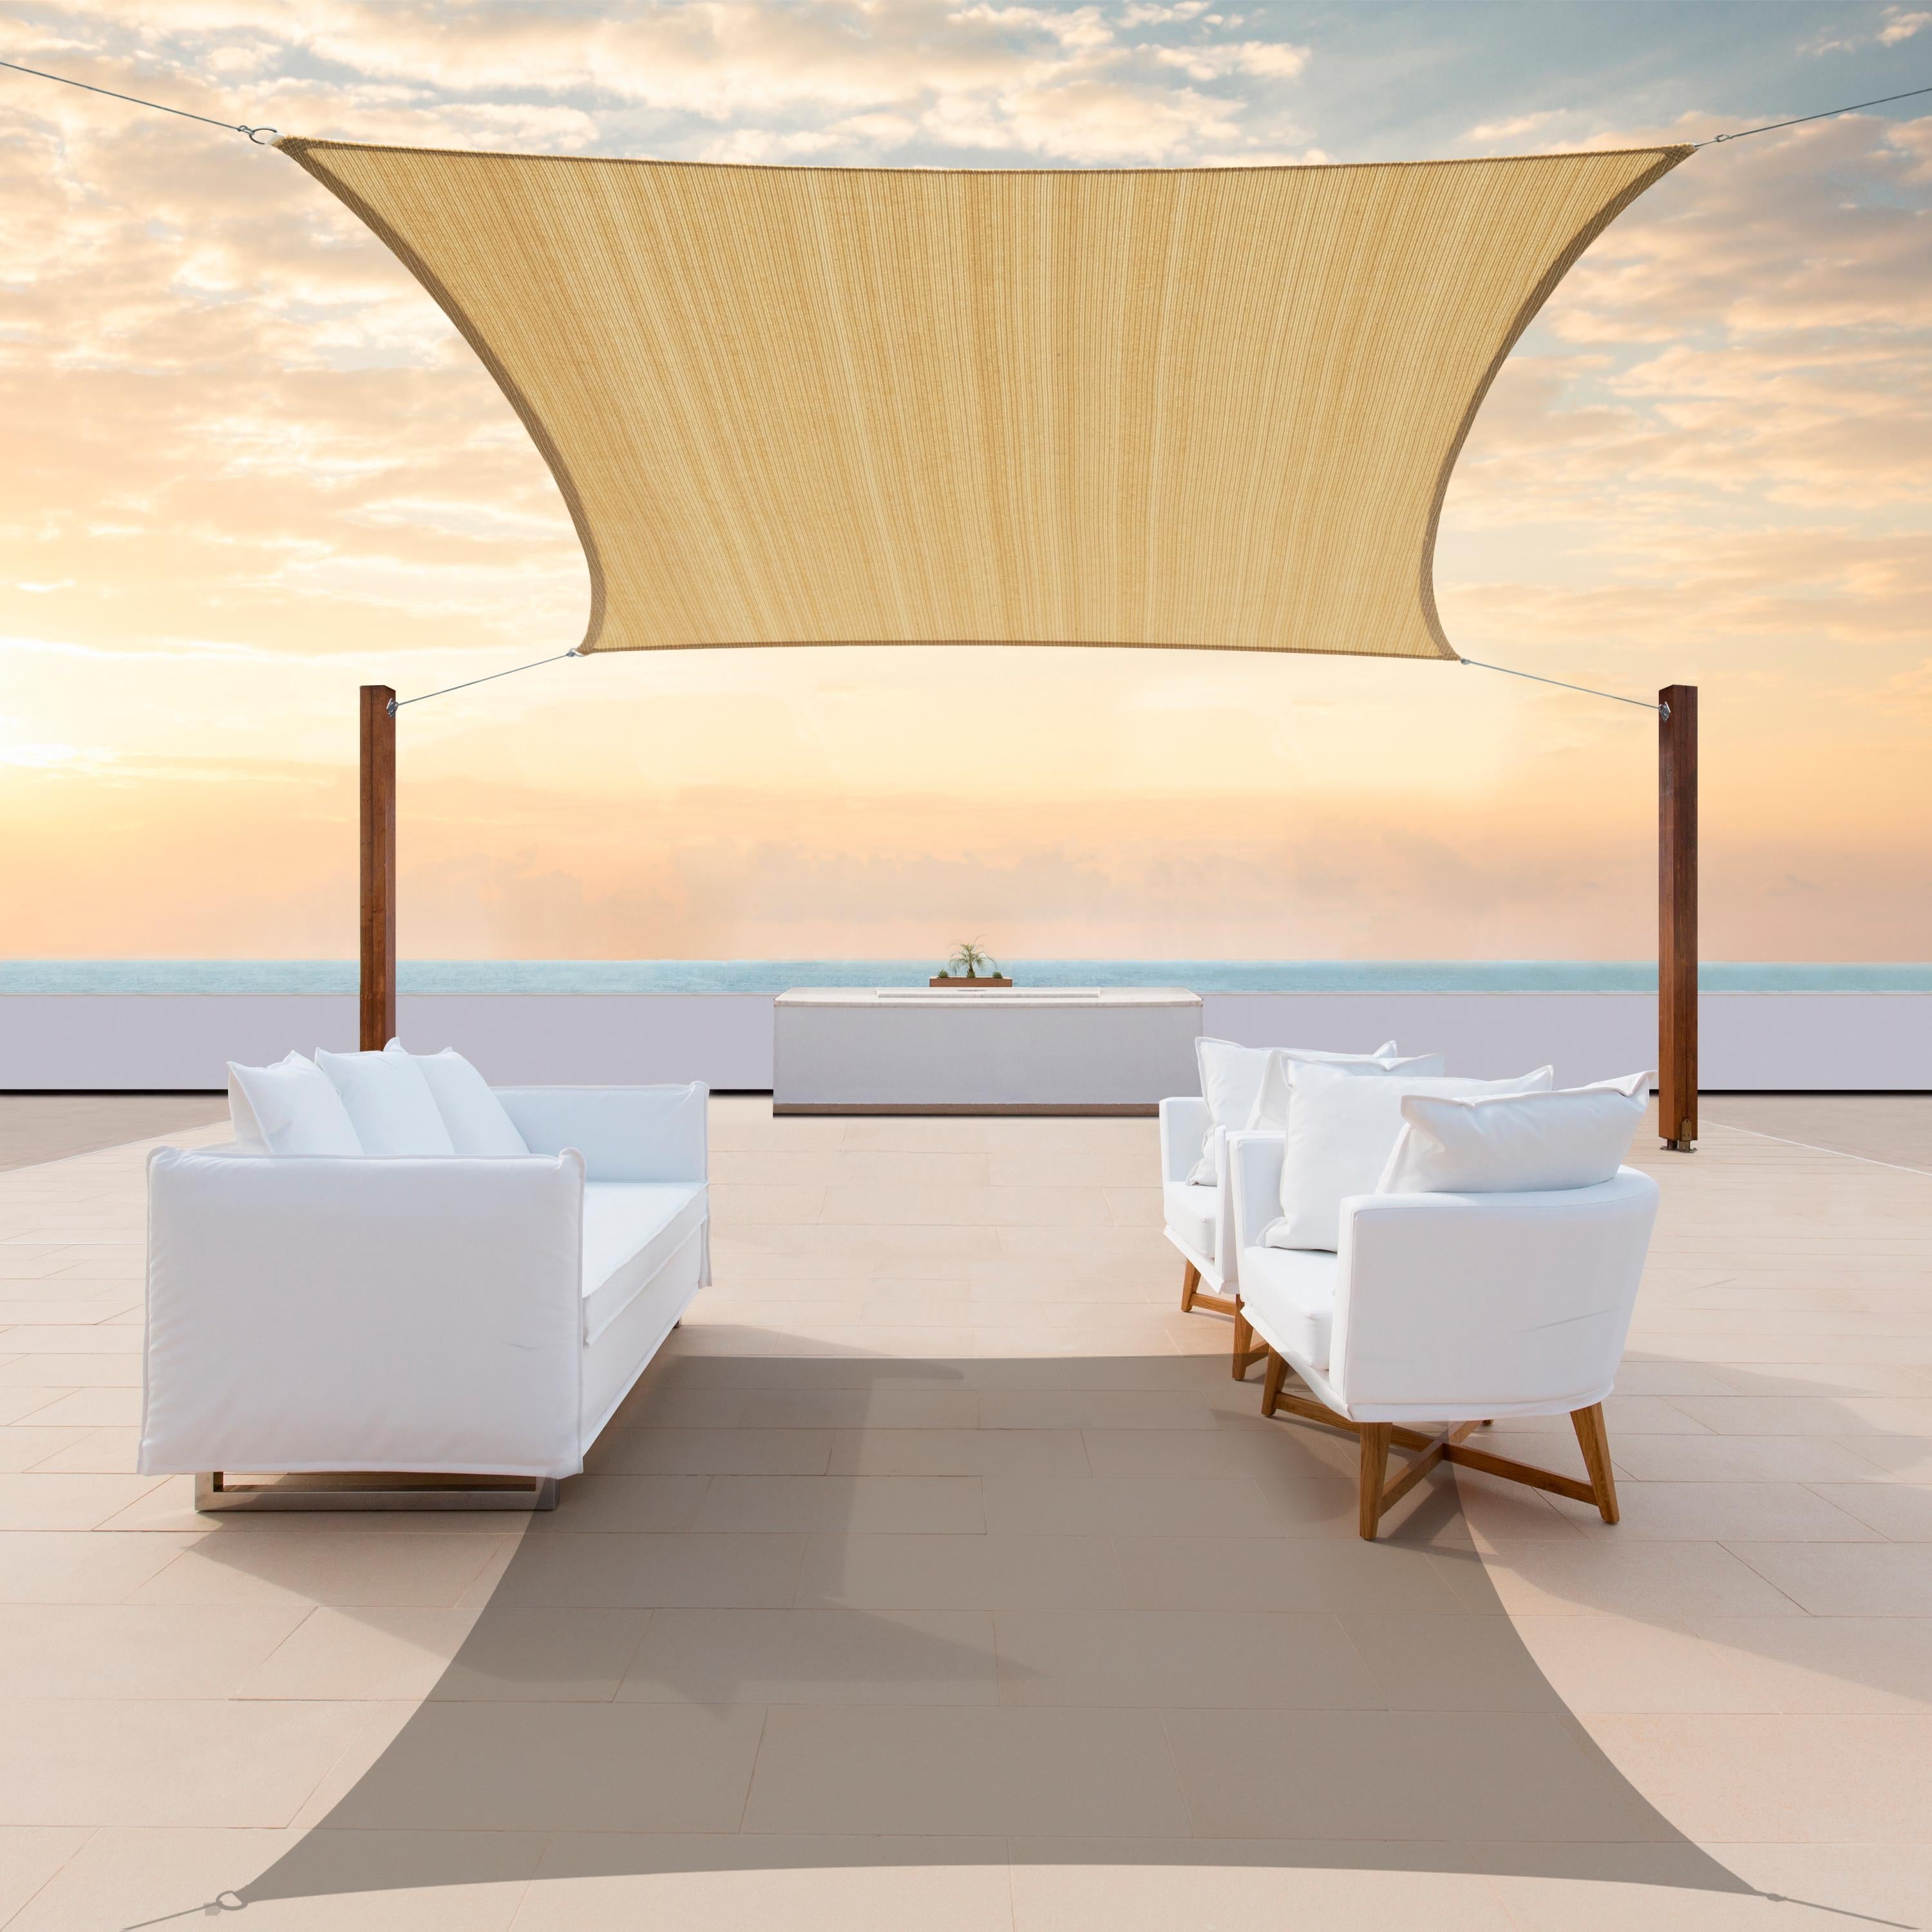 Rectangle Sun Shade Sail Canopy, Commercial Grade, 14 Sizes, 7 Colors Sun Shade Sail Colourtree 16' x 20' Sand Beige 